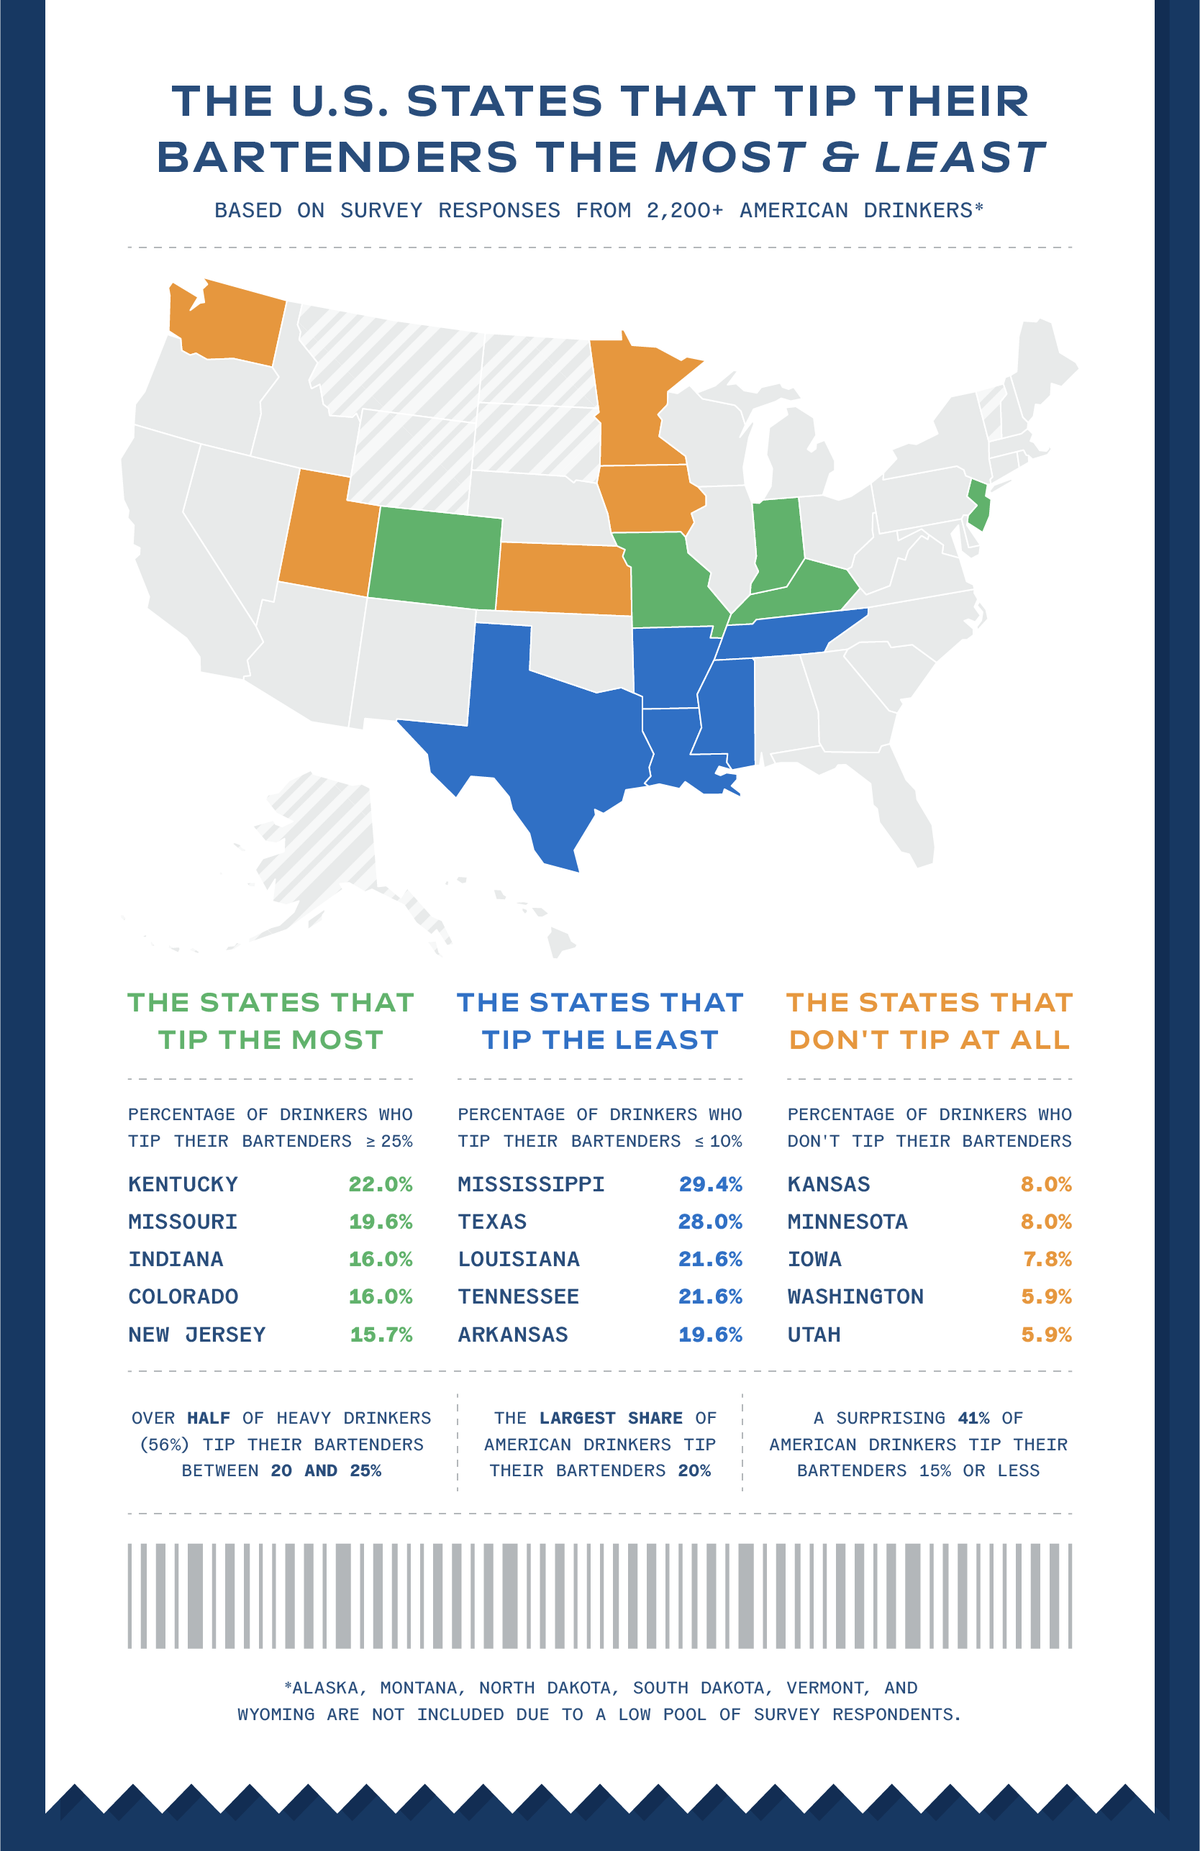 U.S. map showcasing states that tip their bartenders the most and least